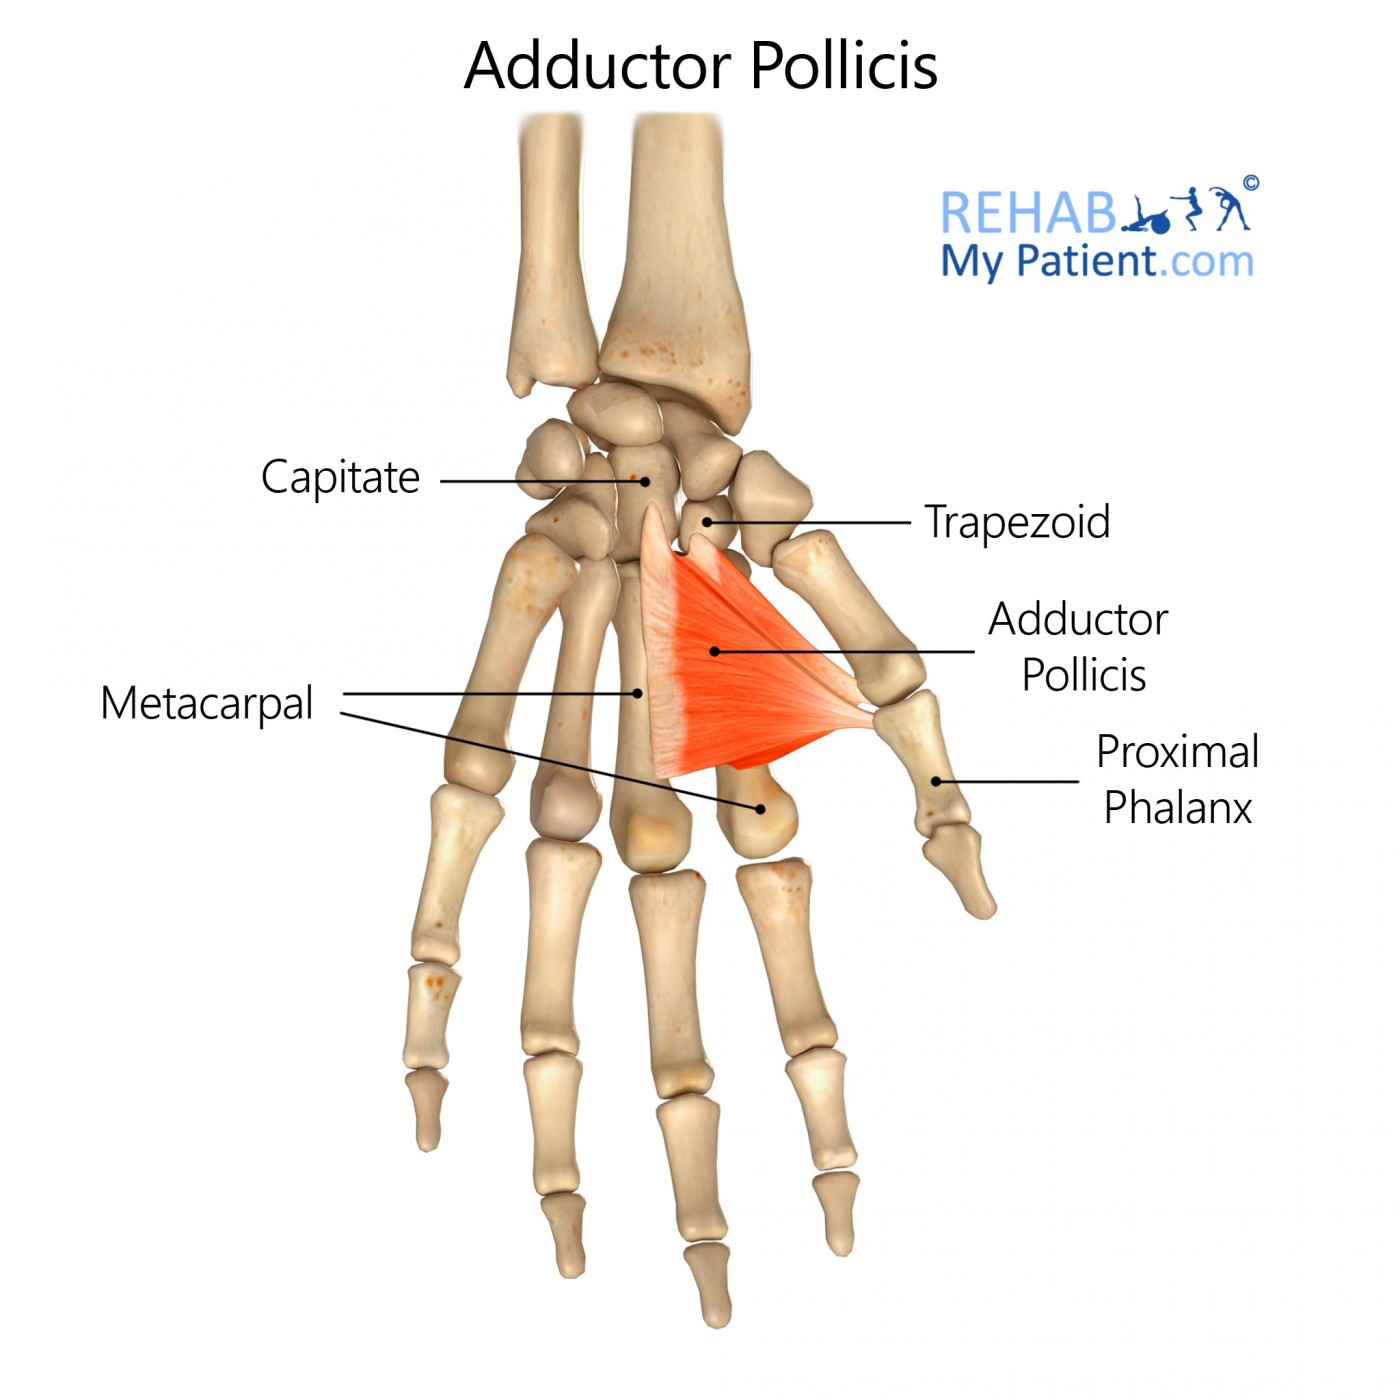 Adductor Pollicis hand